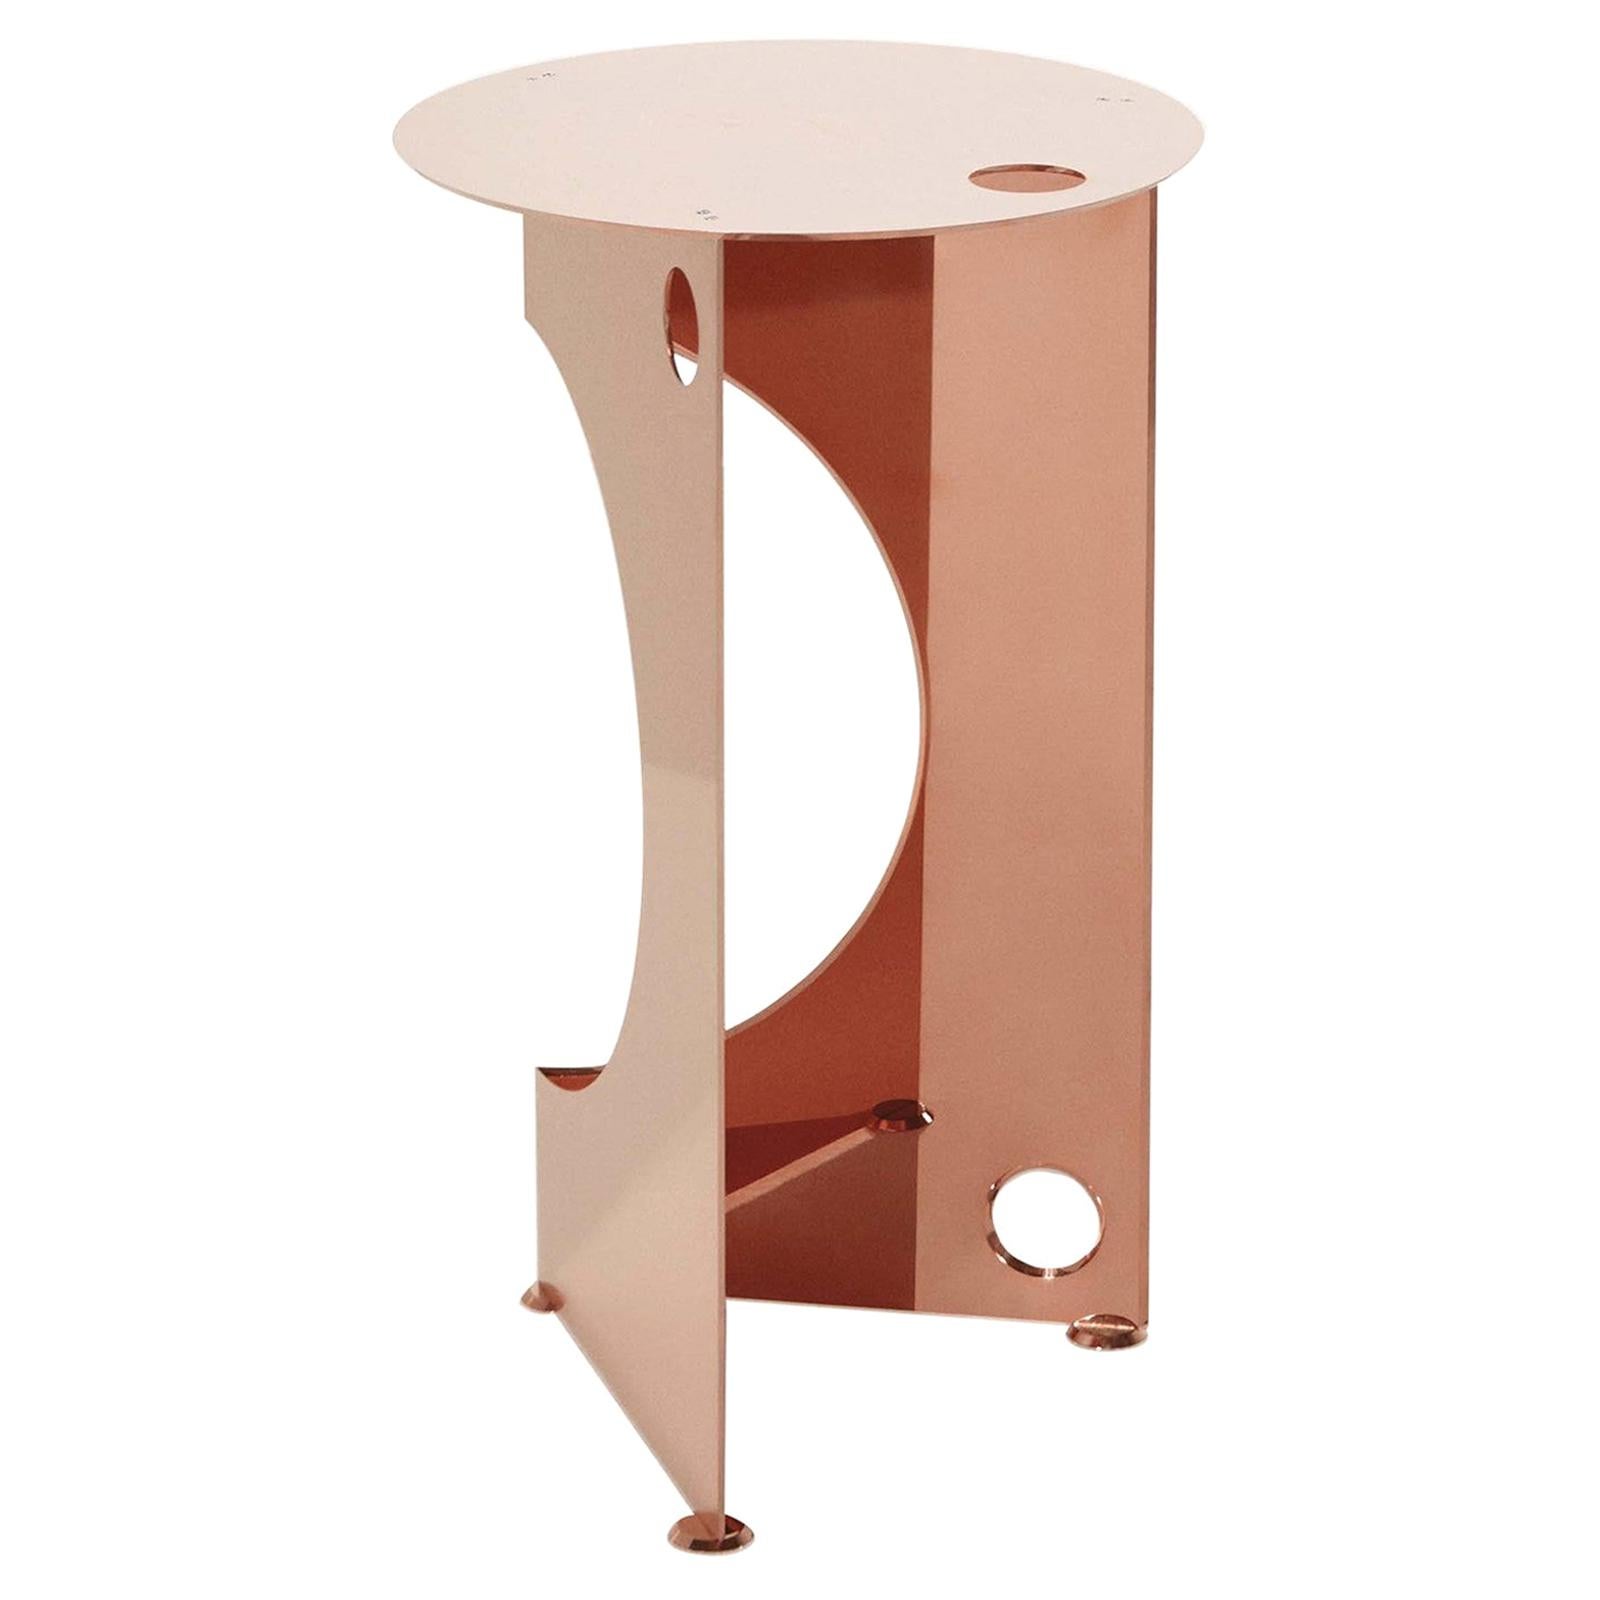 One Side Table in Copper